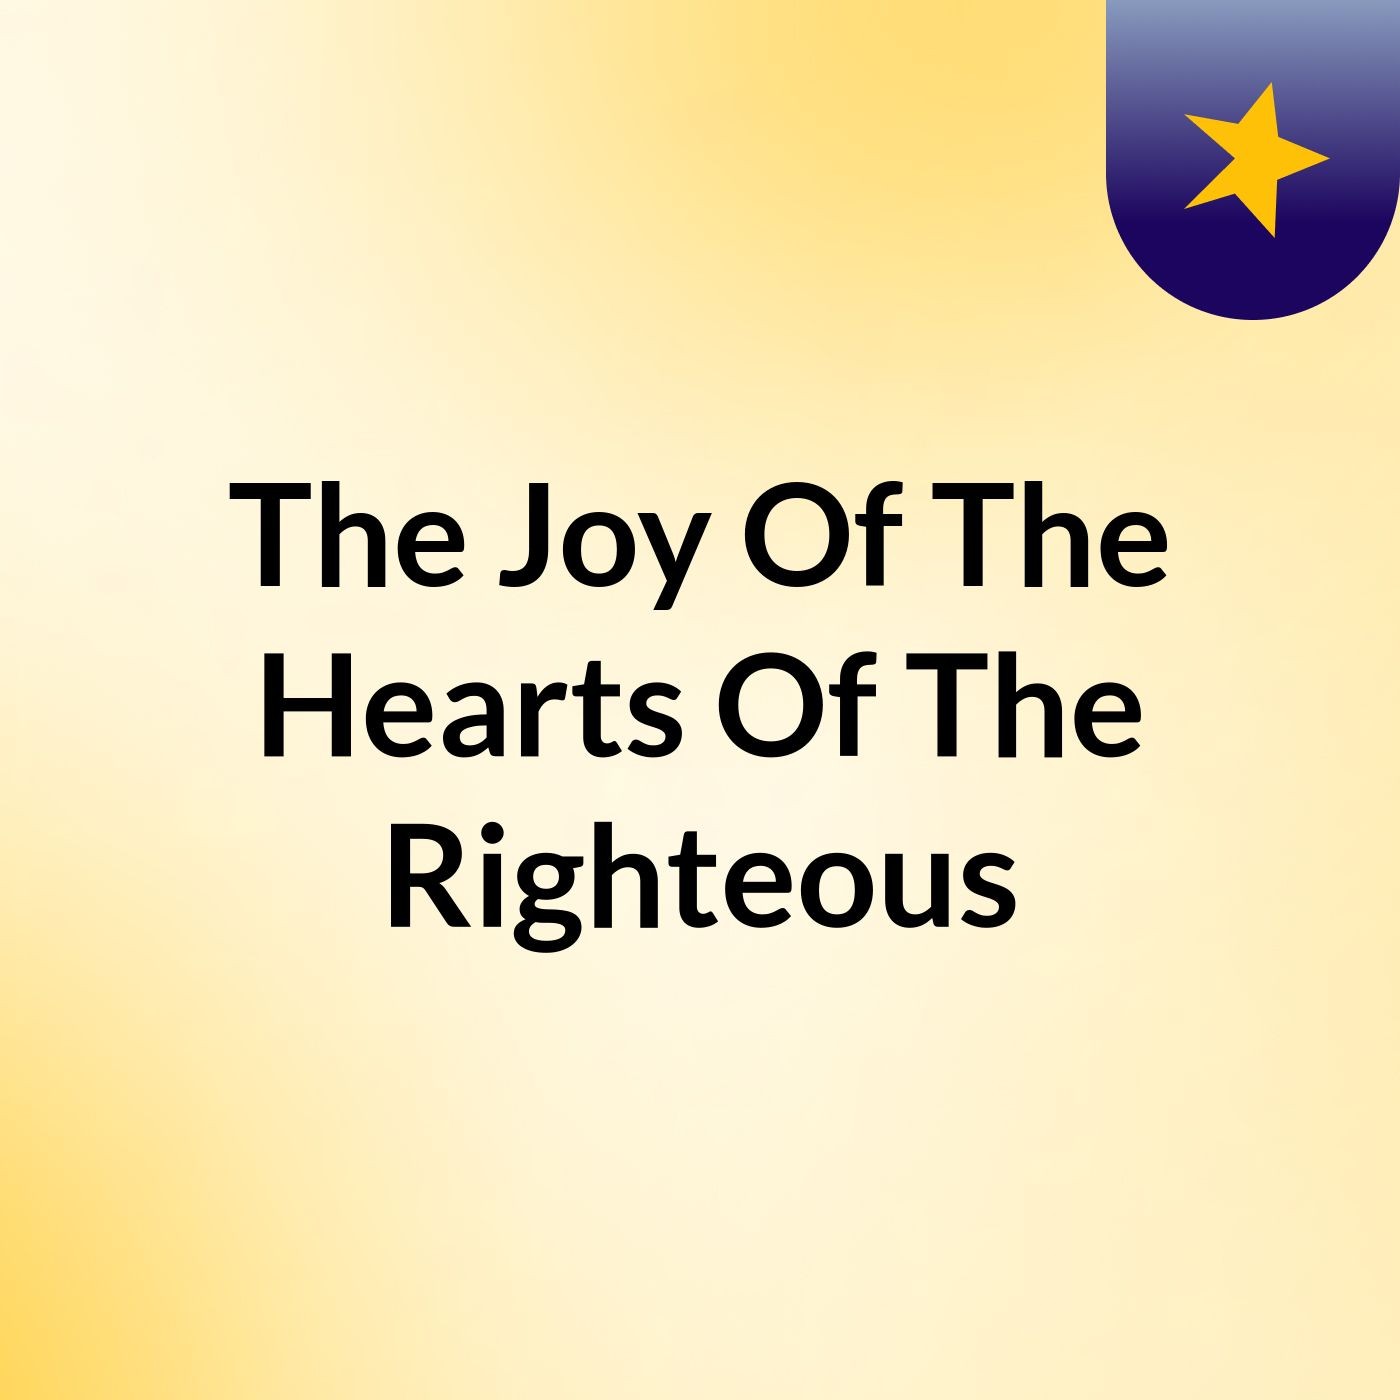 Episode 9 - The Joy Of The Hearts Of The Righteous